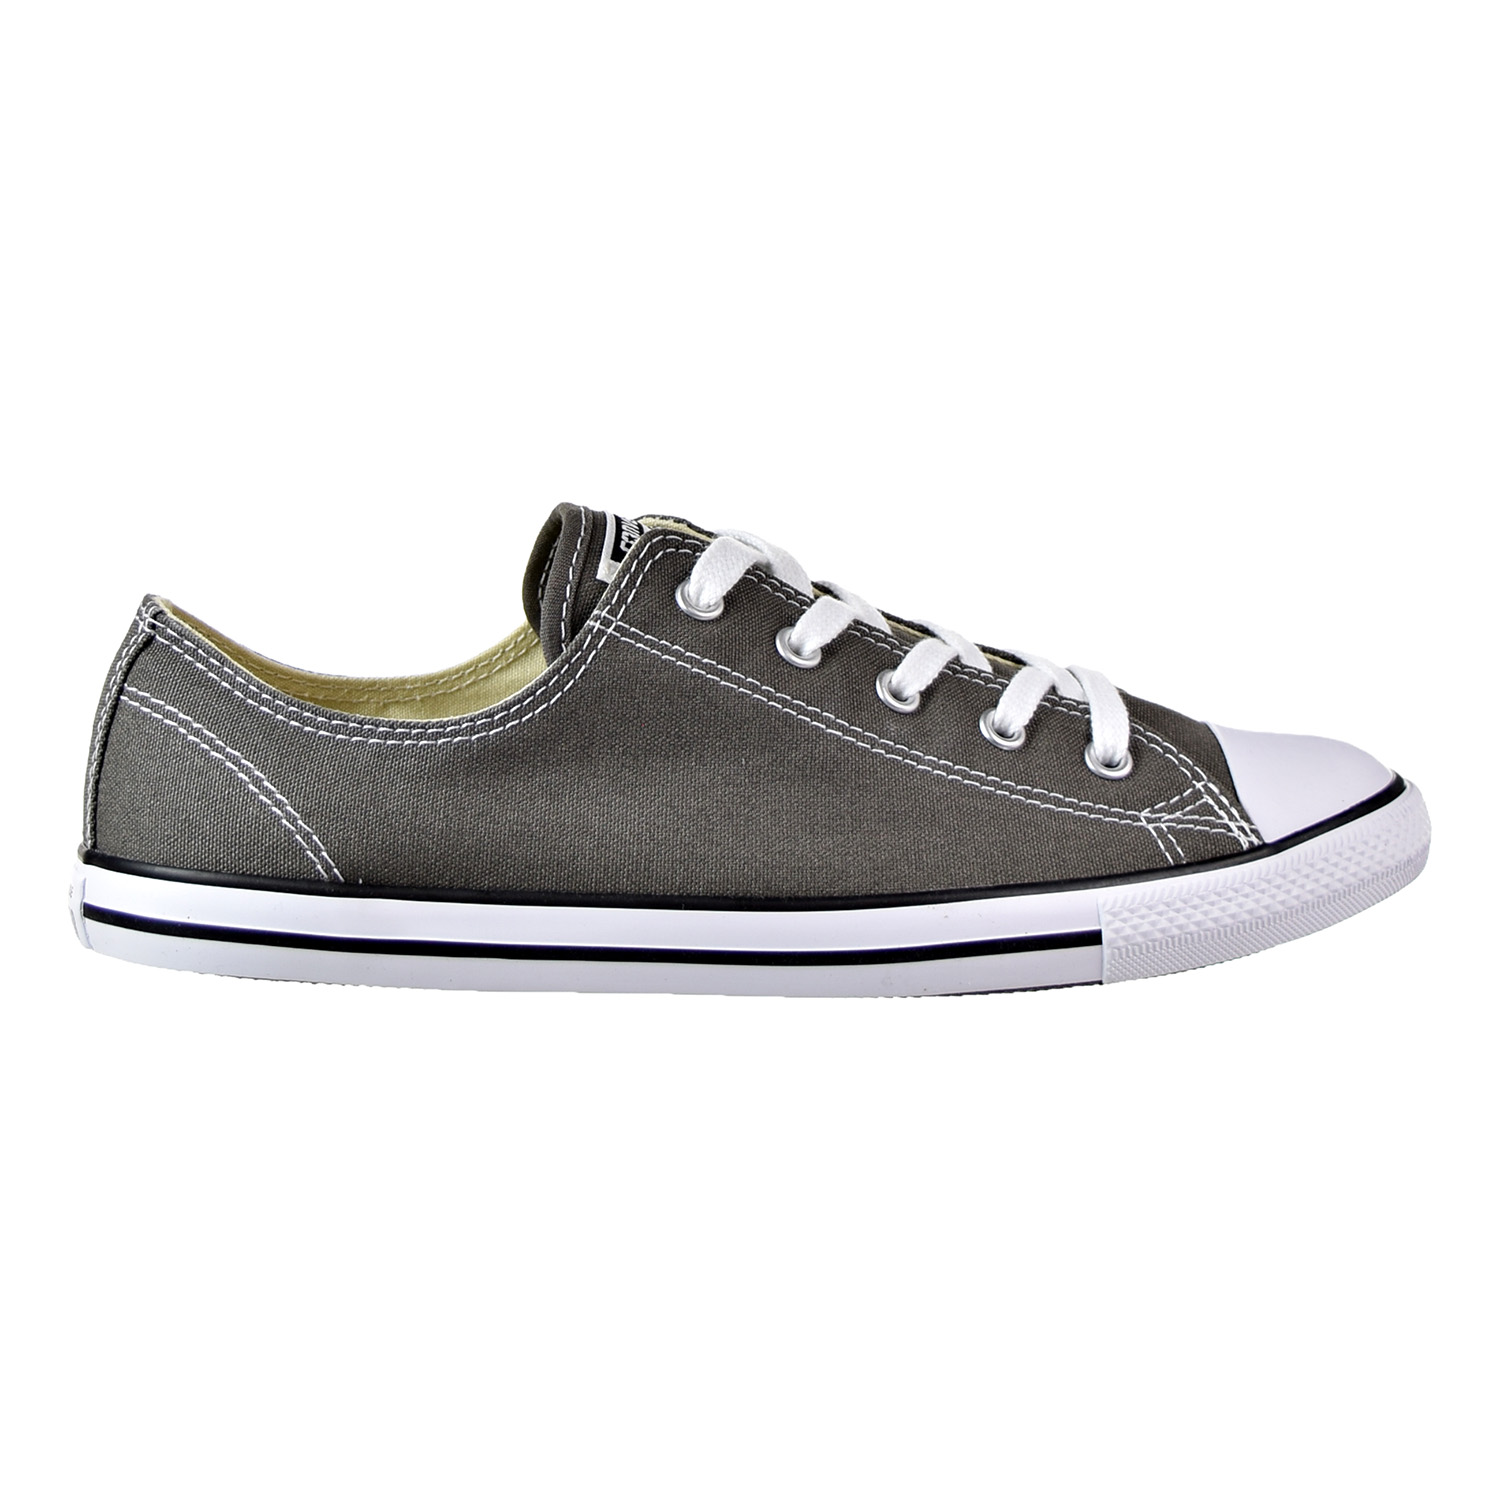 converse chuck taylor all star charcoal